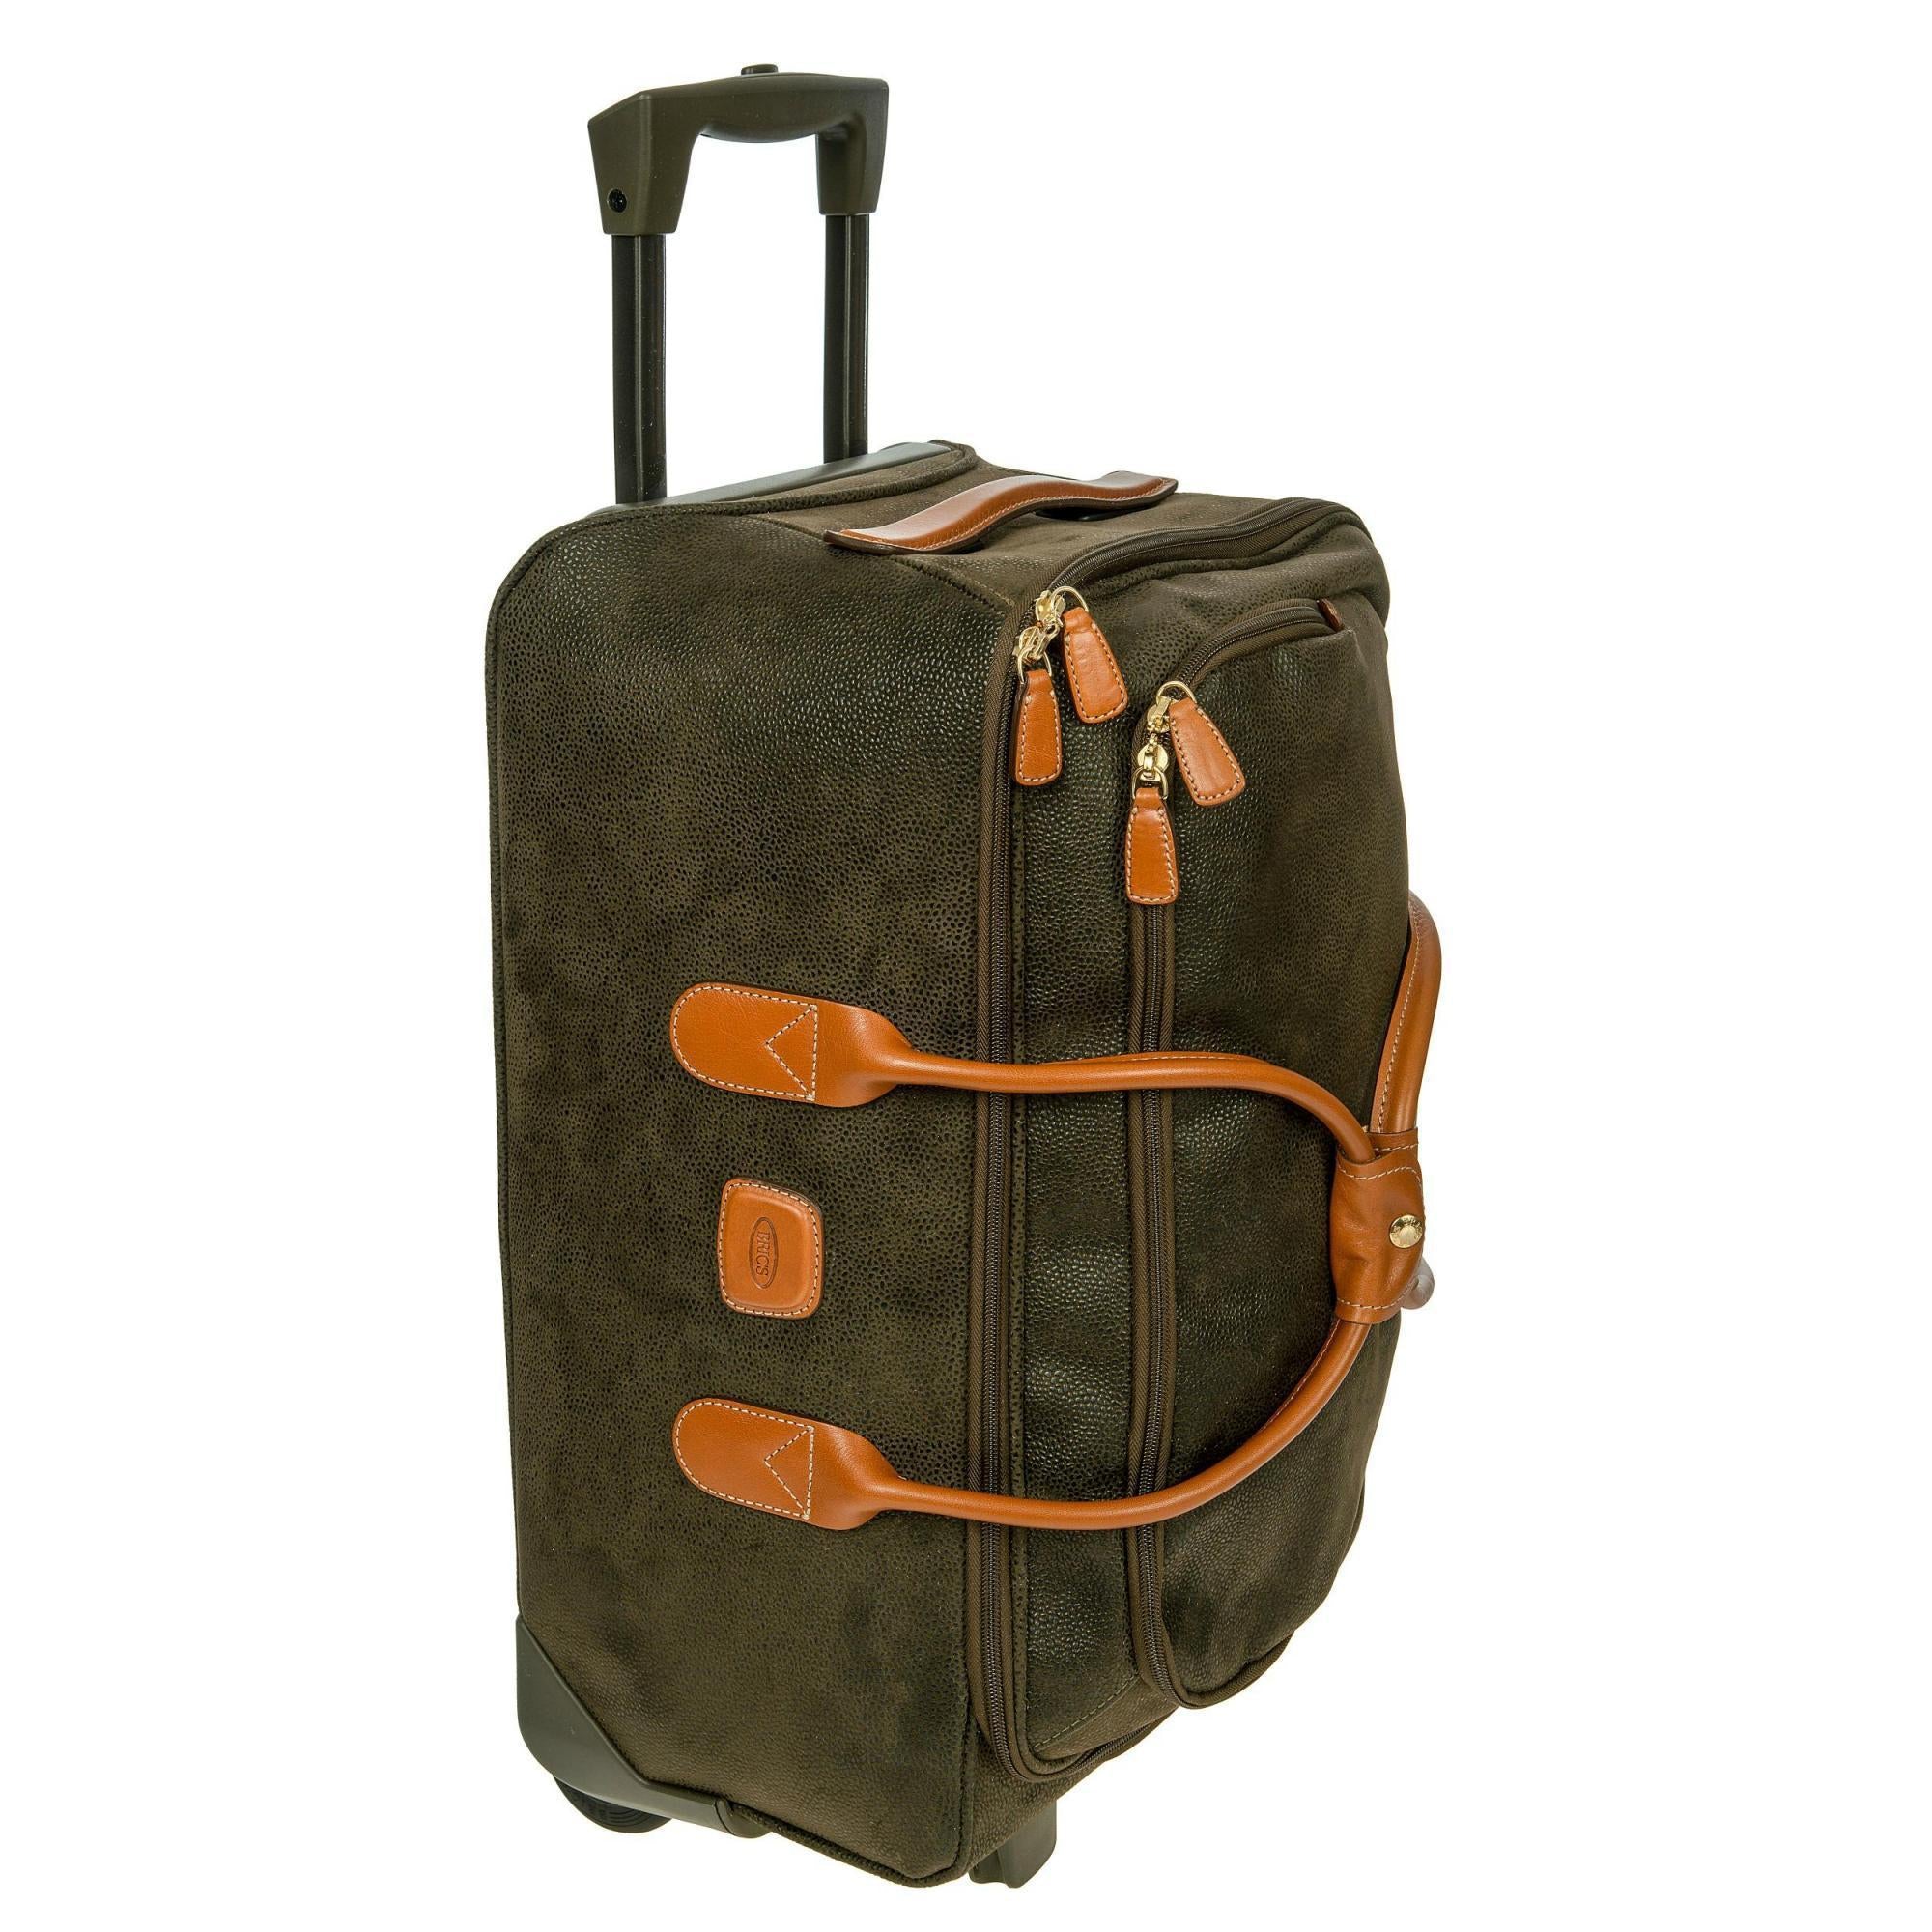  Bric's X Travel - Carry-On Luggage Bag with Spinner Wheels -  21 Inch - Luxury Luggage Bag - Olive